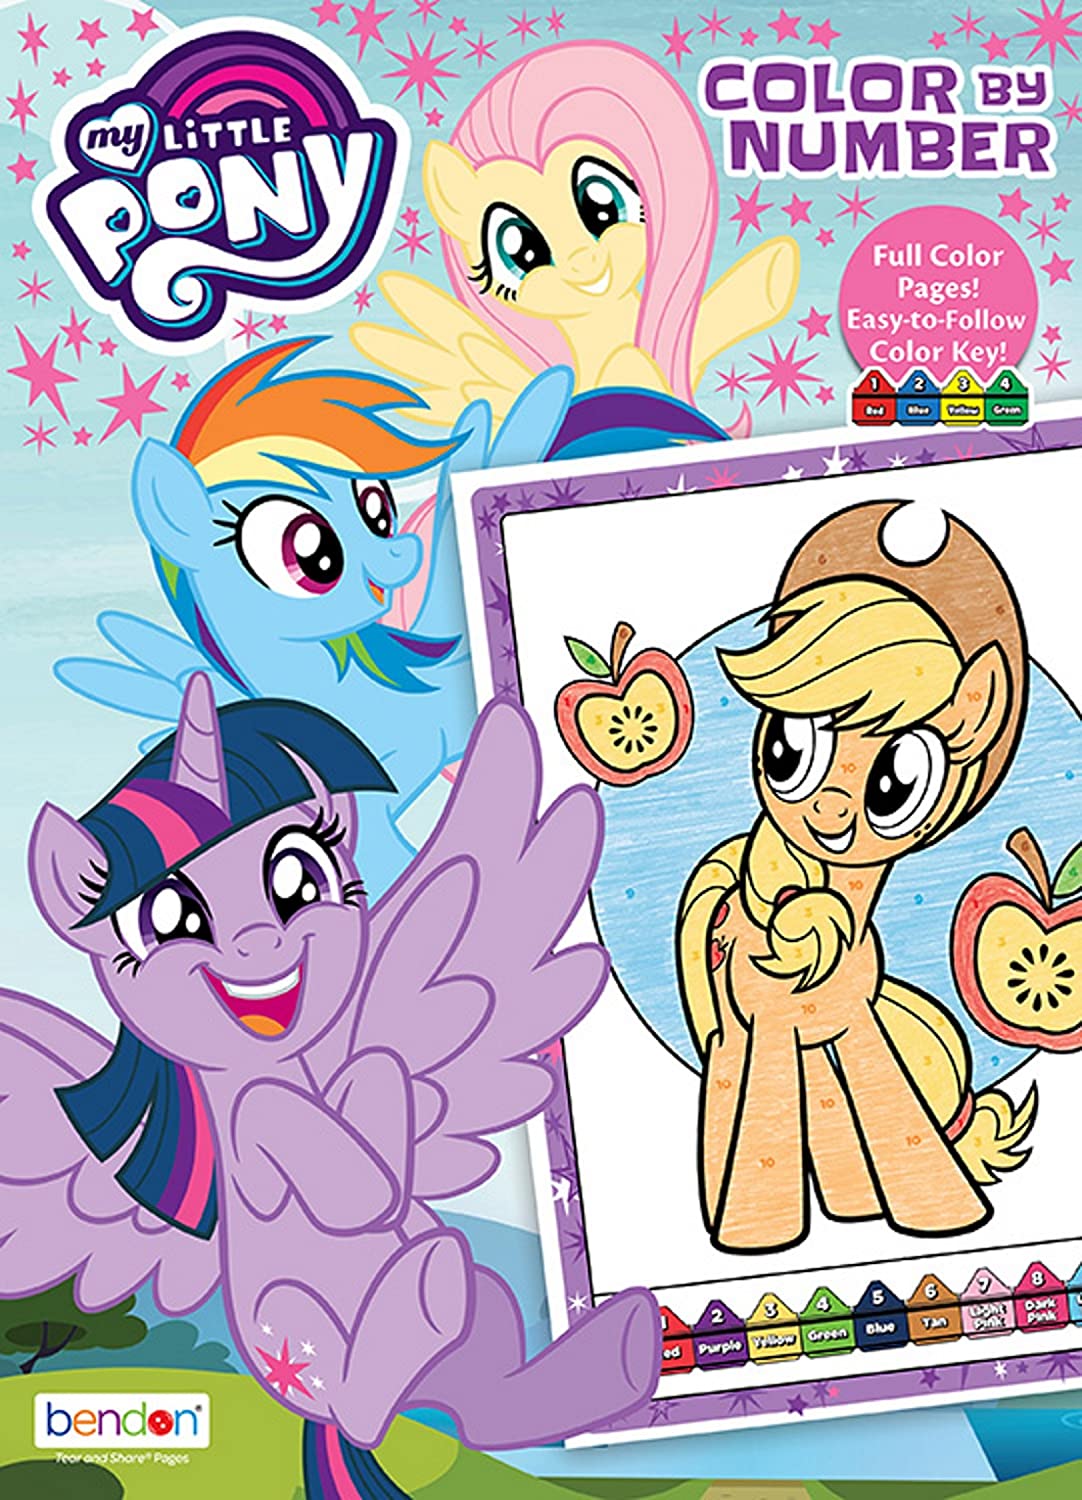 MLP Color by Number Coloring Book